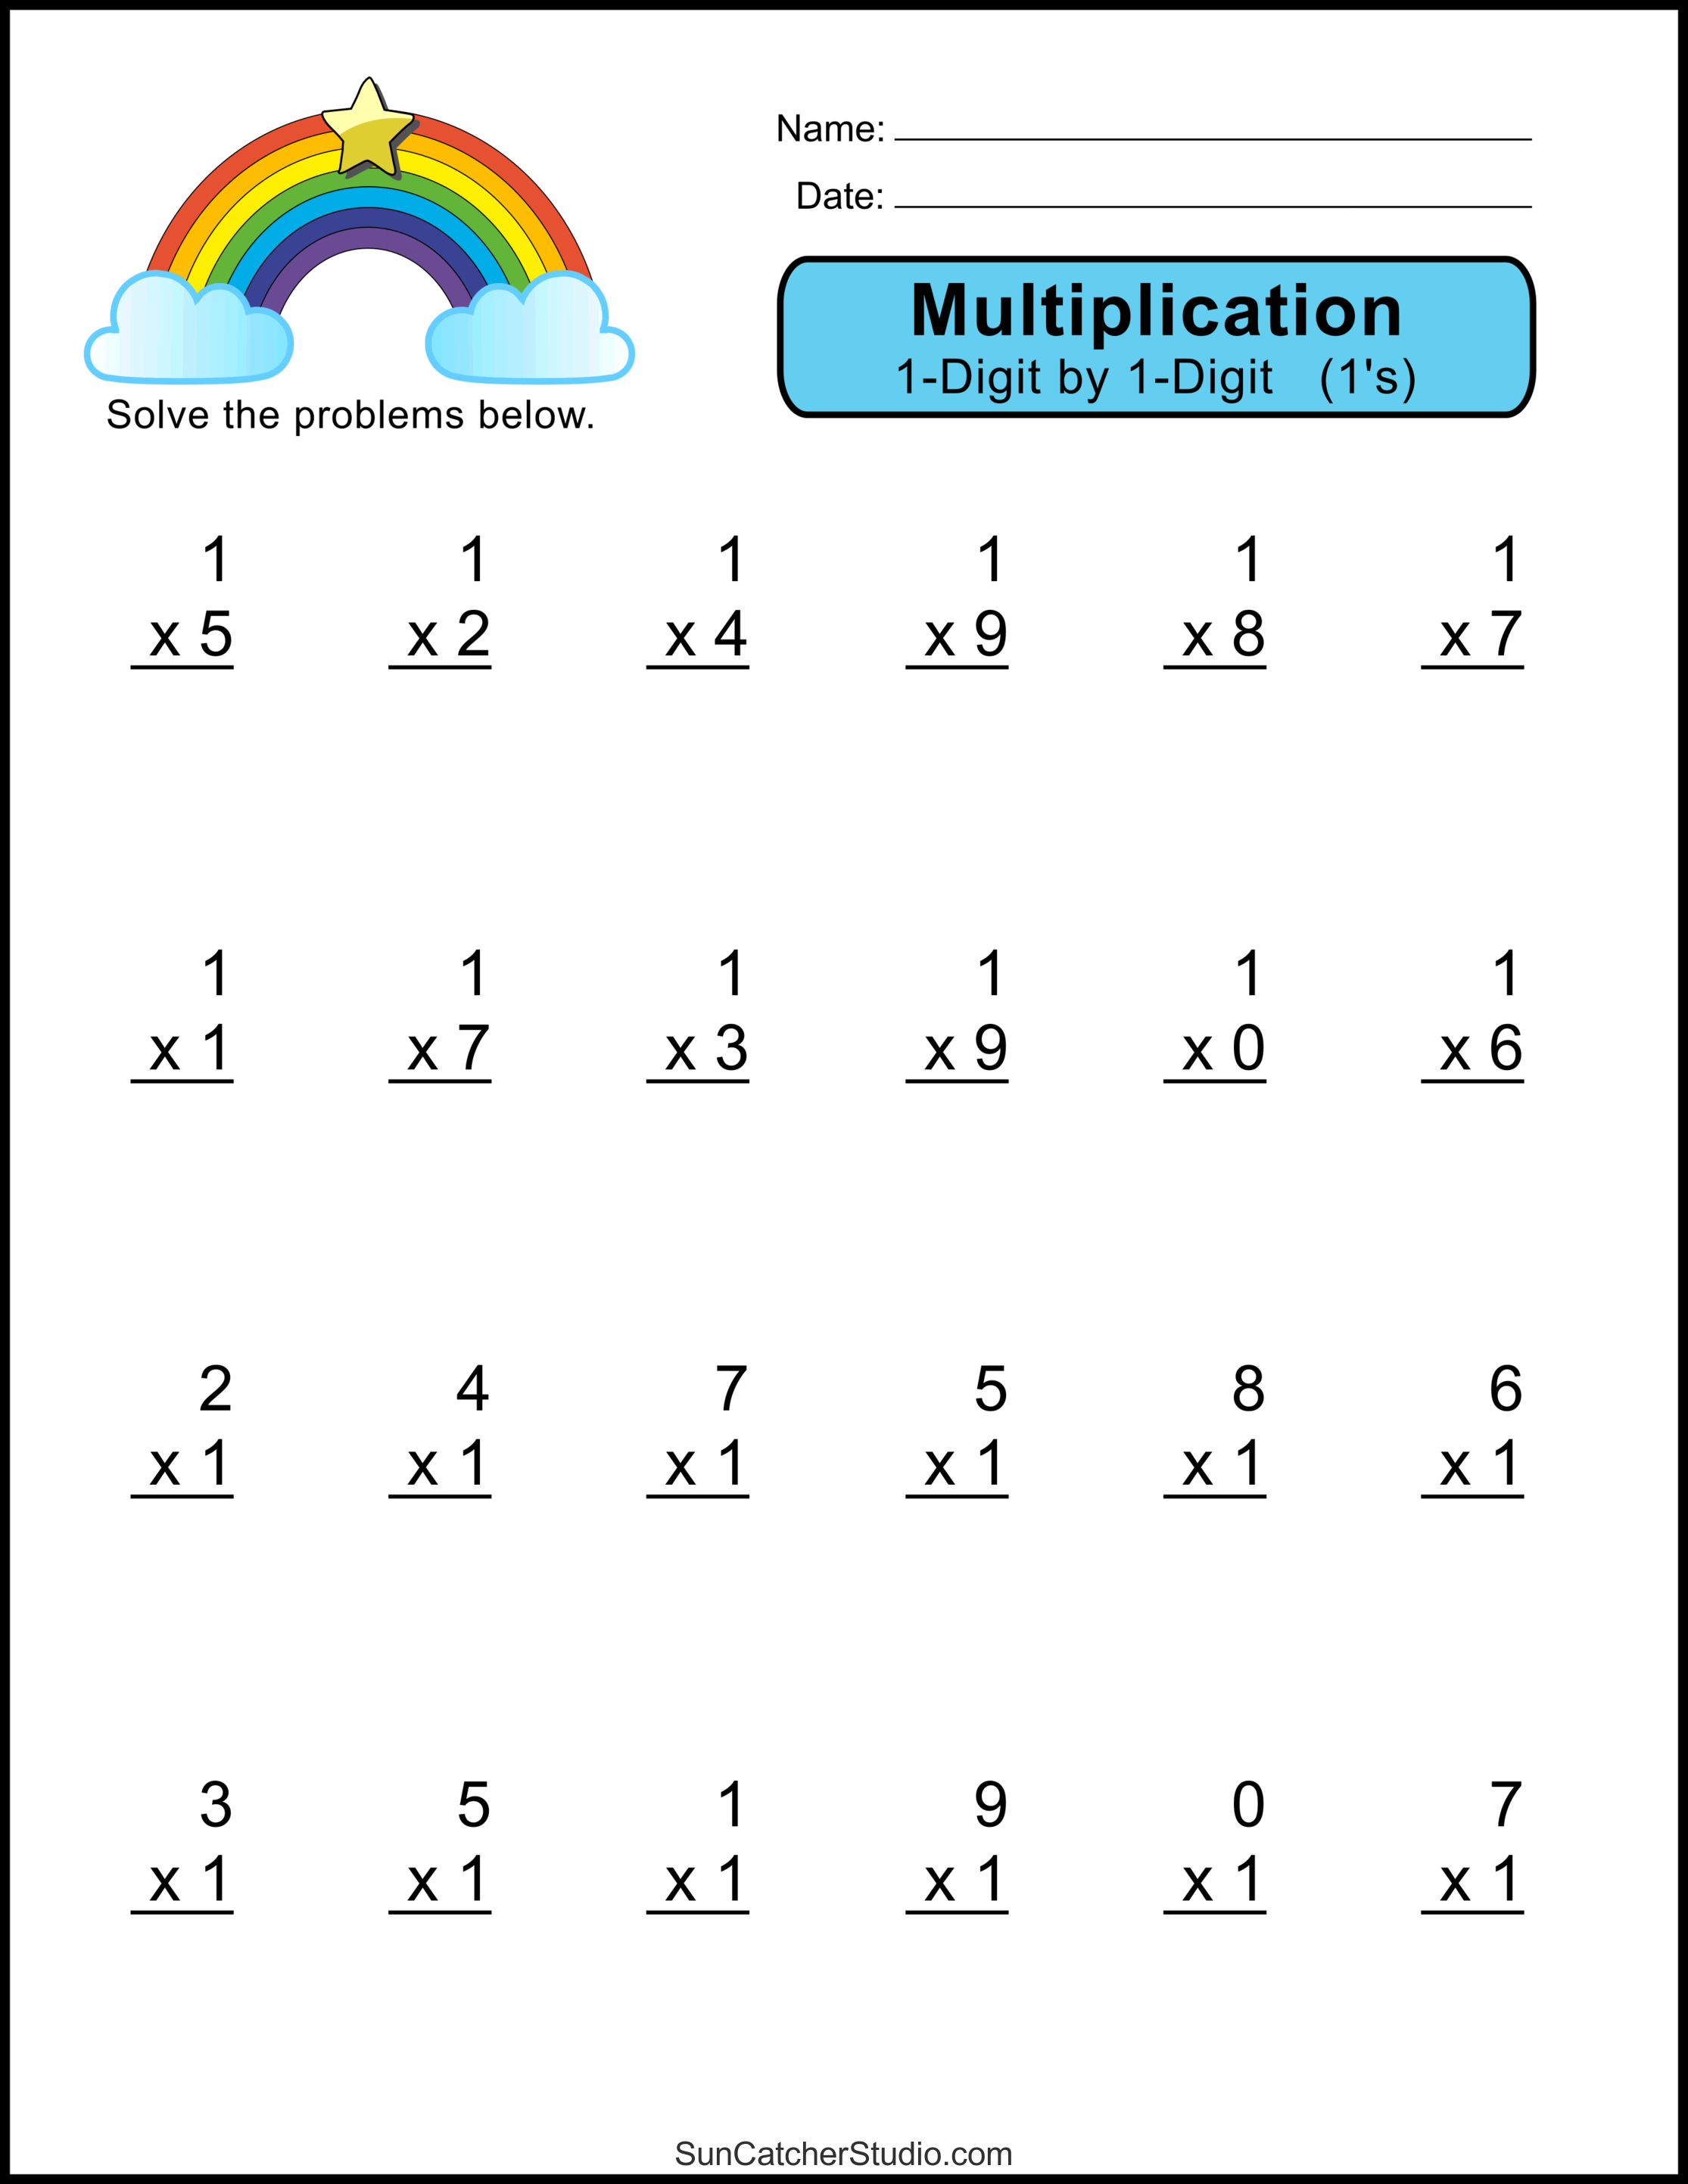 multiplication-table-1-12-times-tables-worksheets